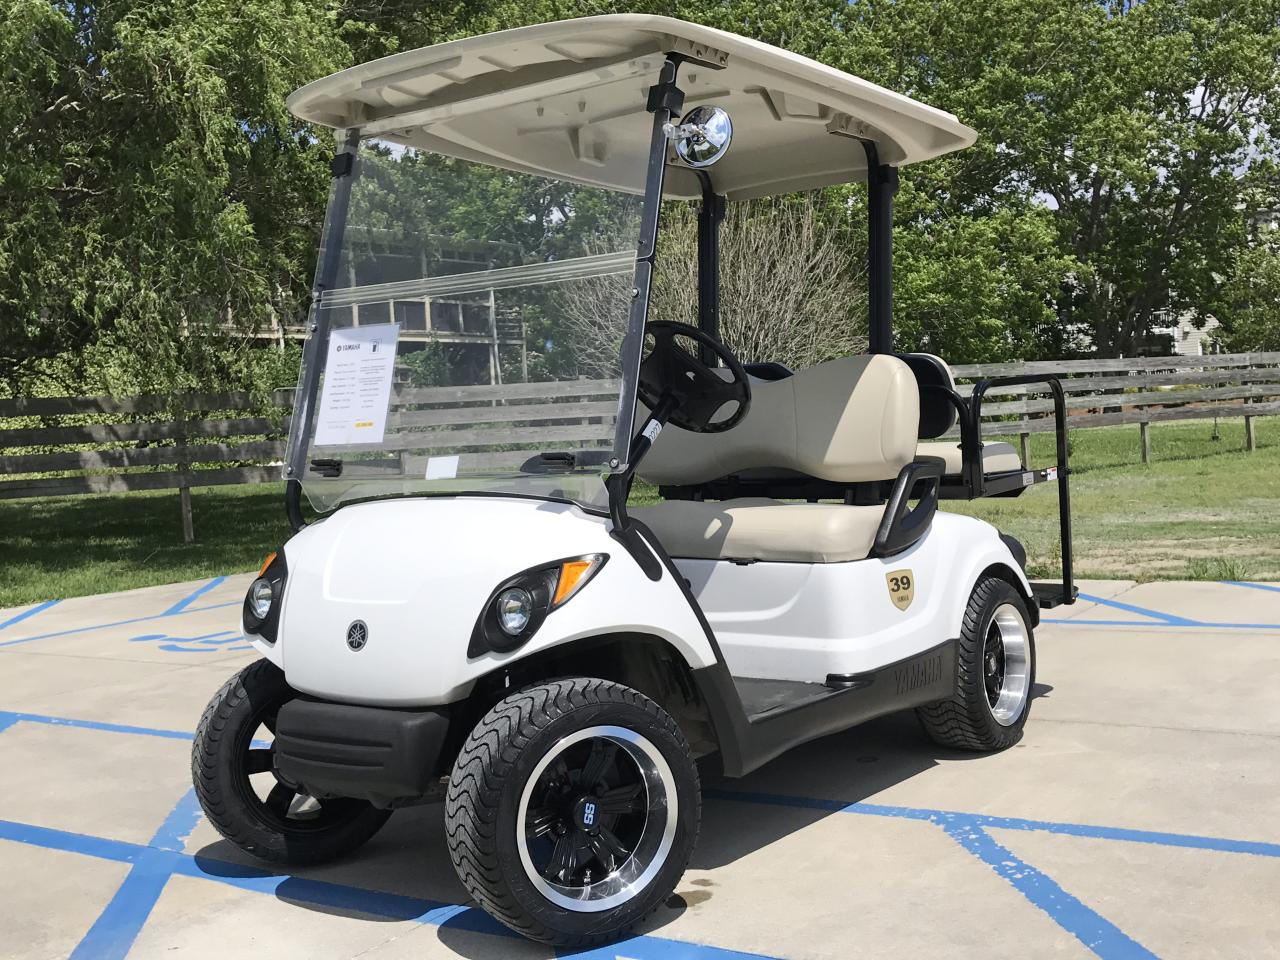 Used Golf Carts for Sale by Owner in Crawford, Wisconsin: Your Ride to Adventure